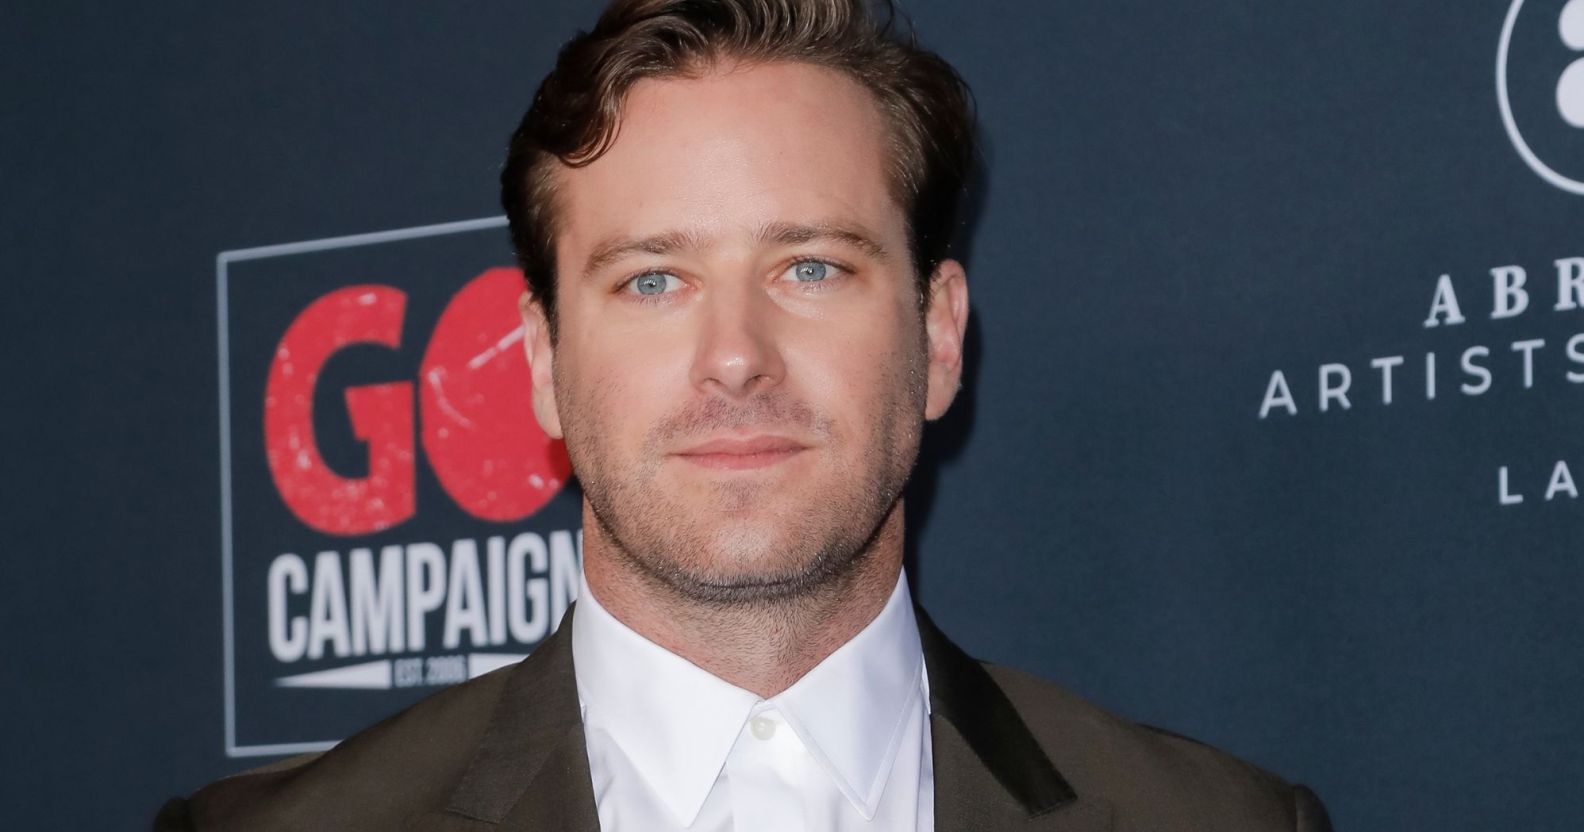 Armie Hammer pictured during a red carpet event.